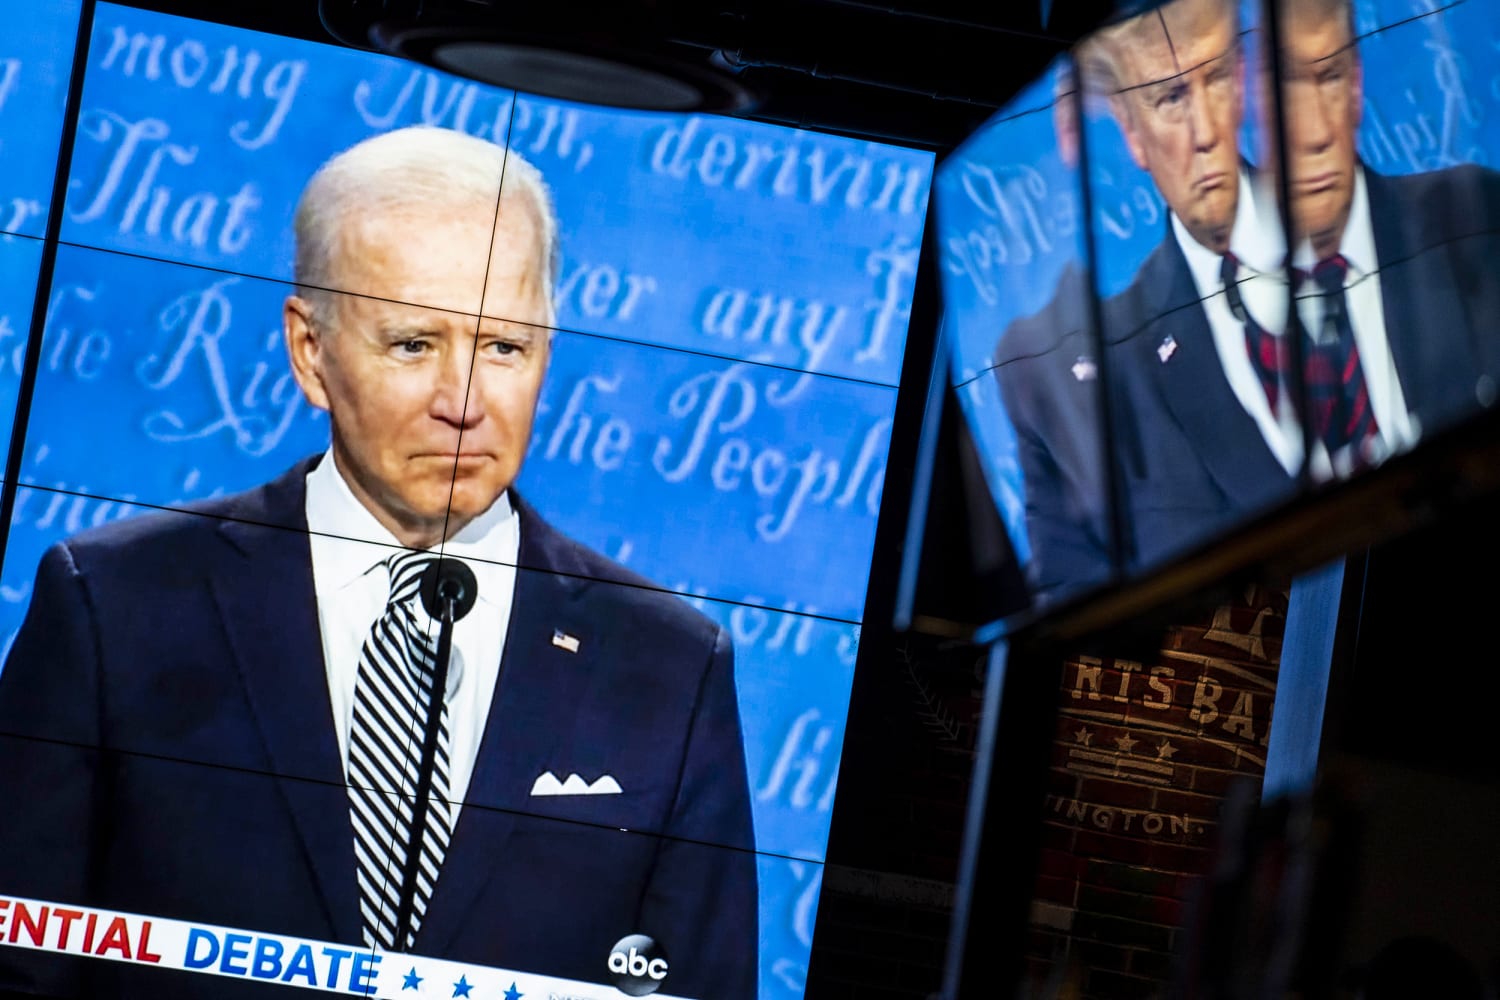 What could almost ensure that Biden will face a serious primary challenge